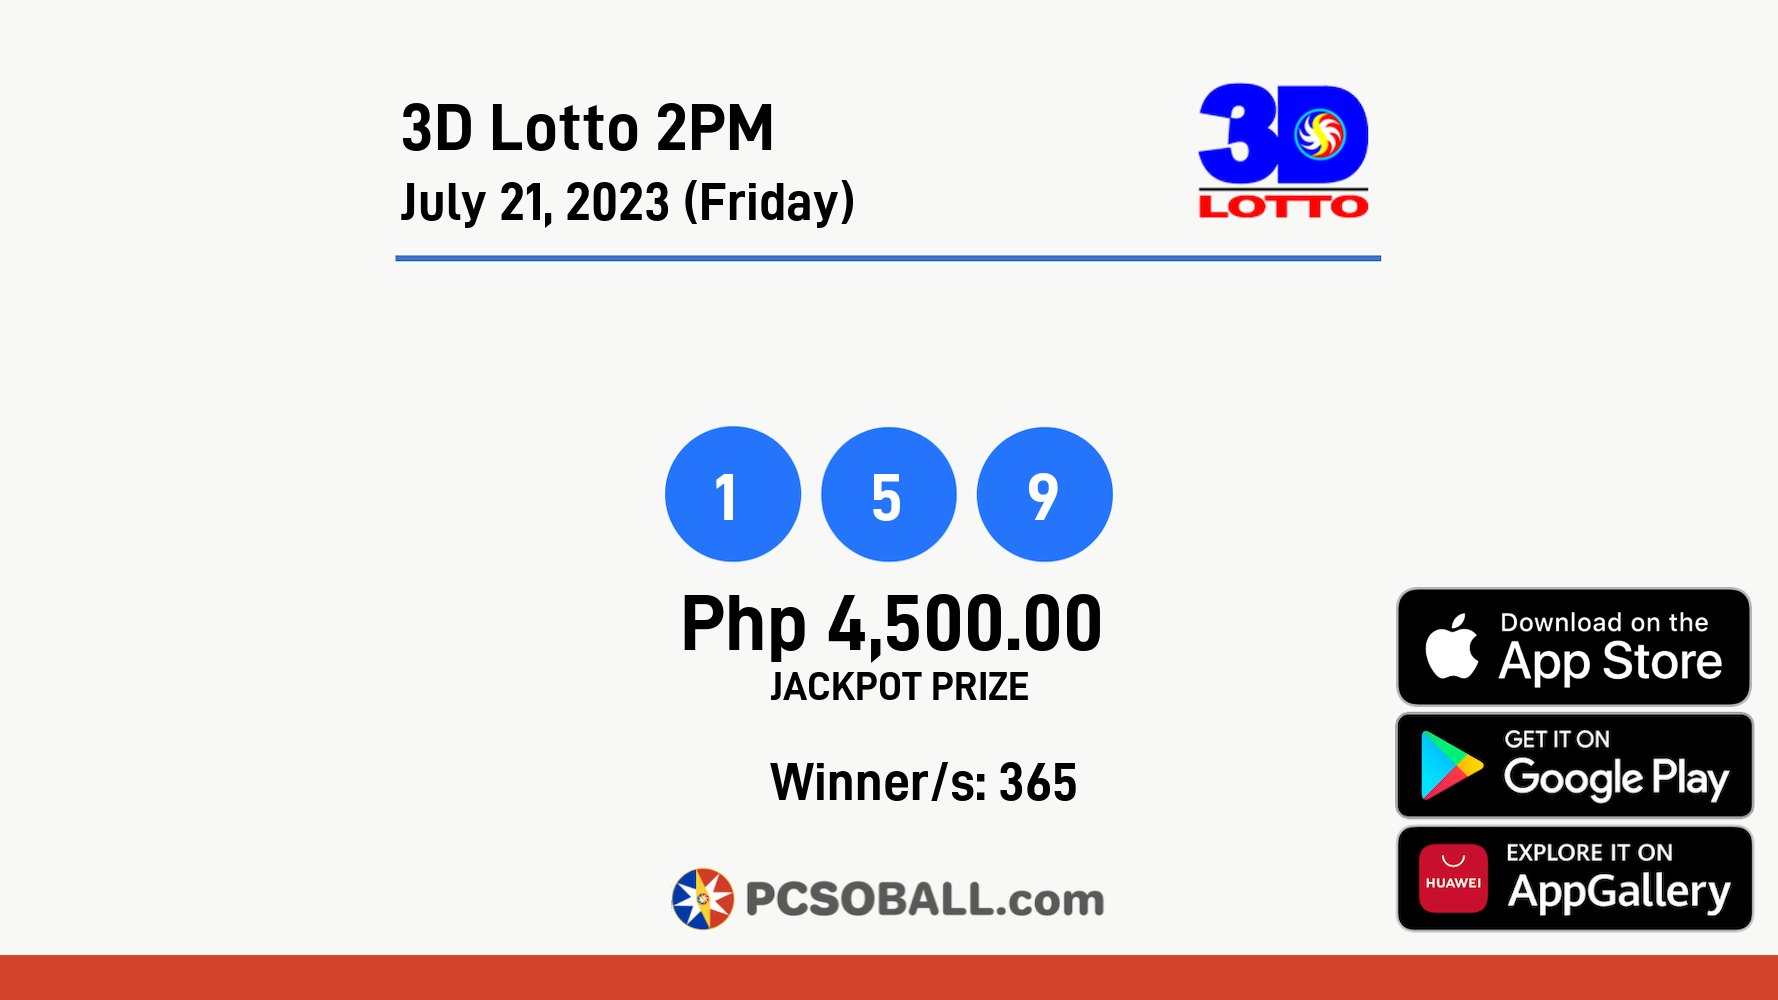 3D Lotto 2PM July 21, 2023 (Friday) Result